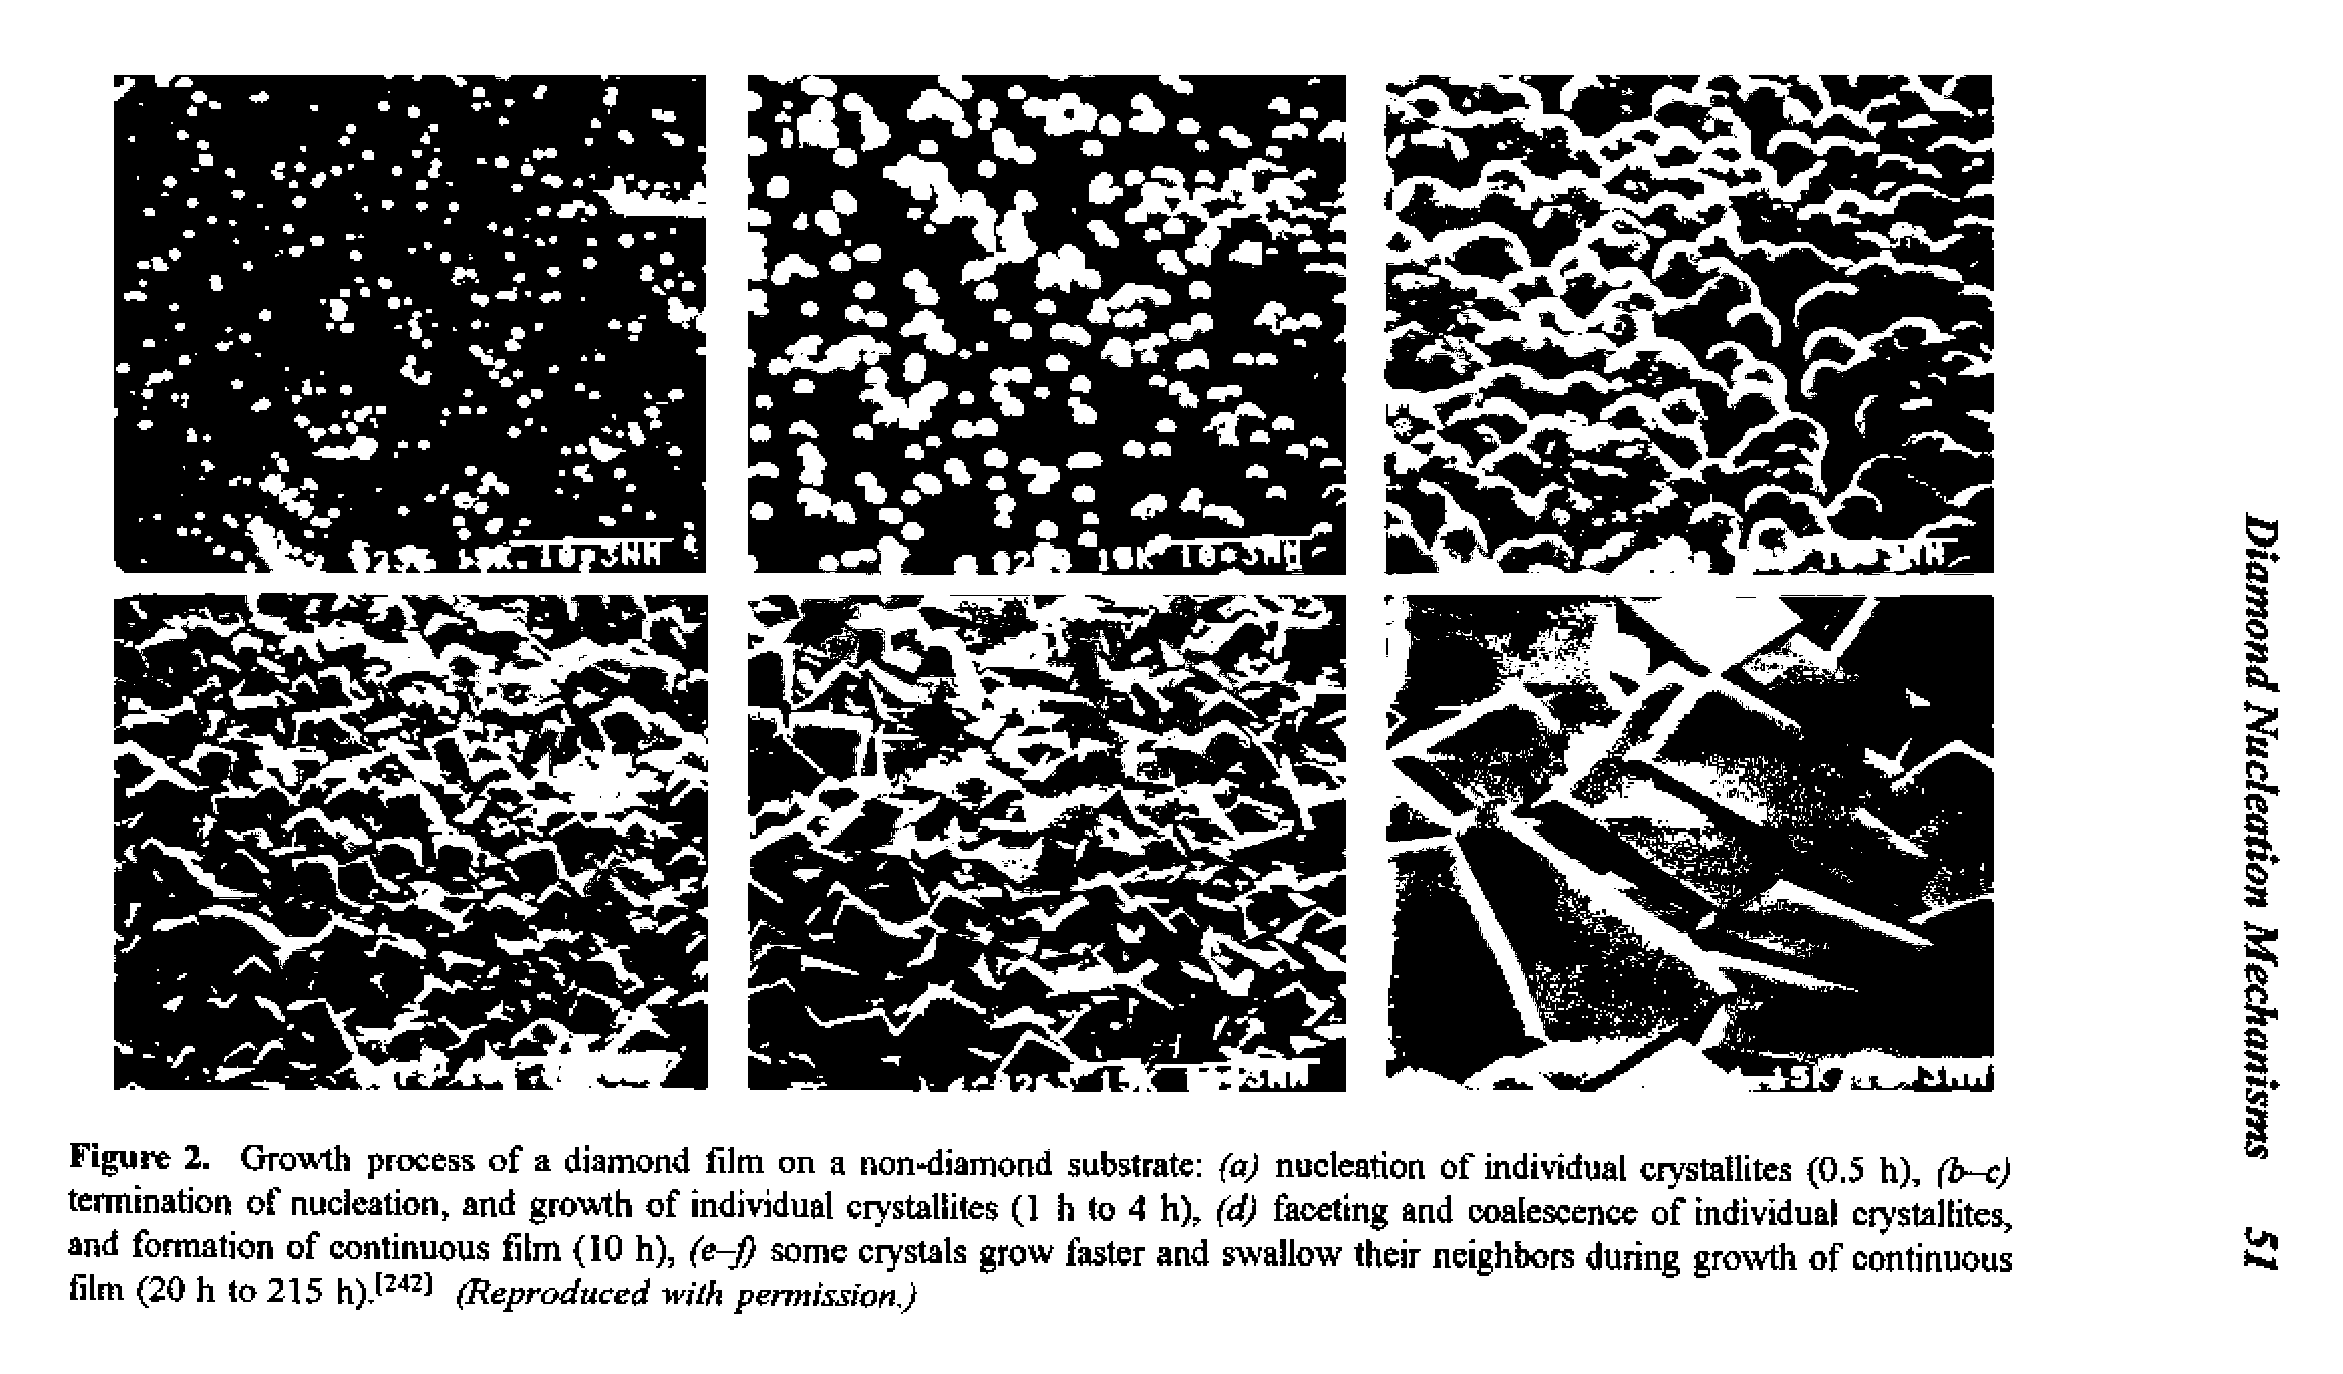 Figure 2. Growth process of a diamond film on a non-diamond substrate (aj nucleation of individual crystallites (0.5 h), (b-cj termination of nucleation, and growth of individual crystallites (1 h to 4 h), (dj faceting and coalescence of individual crystallites, and formation of continuous film (10 h), some crystals grow faster and swallow their neighbors during growth of continuous film (20 h to 215 (Reproduced yrilk permission.)...